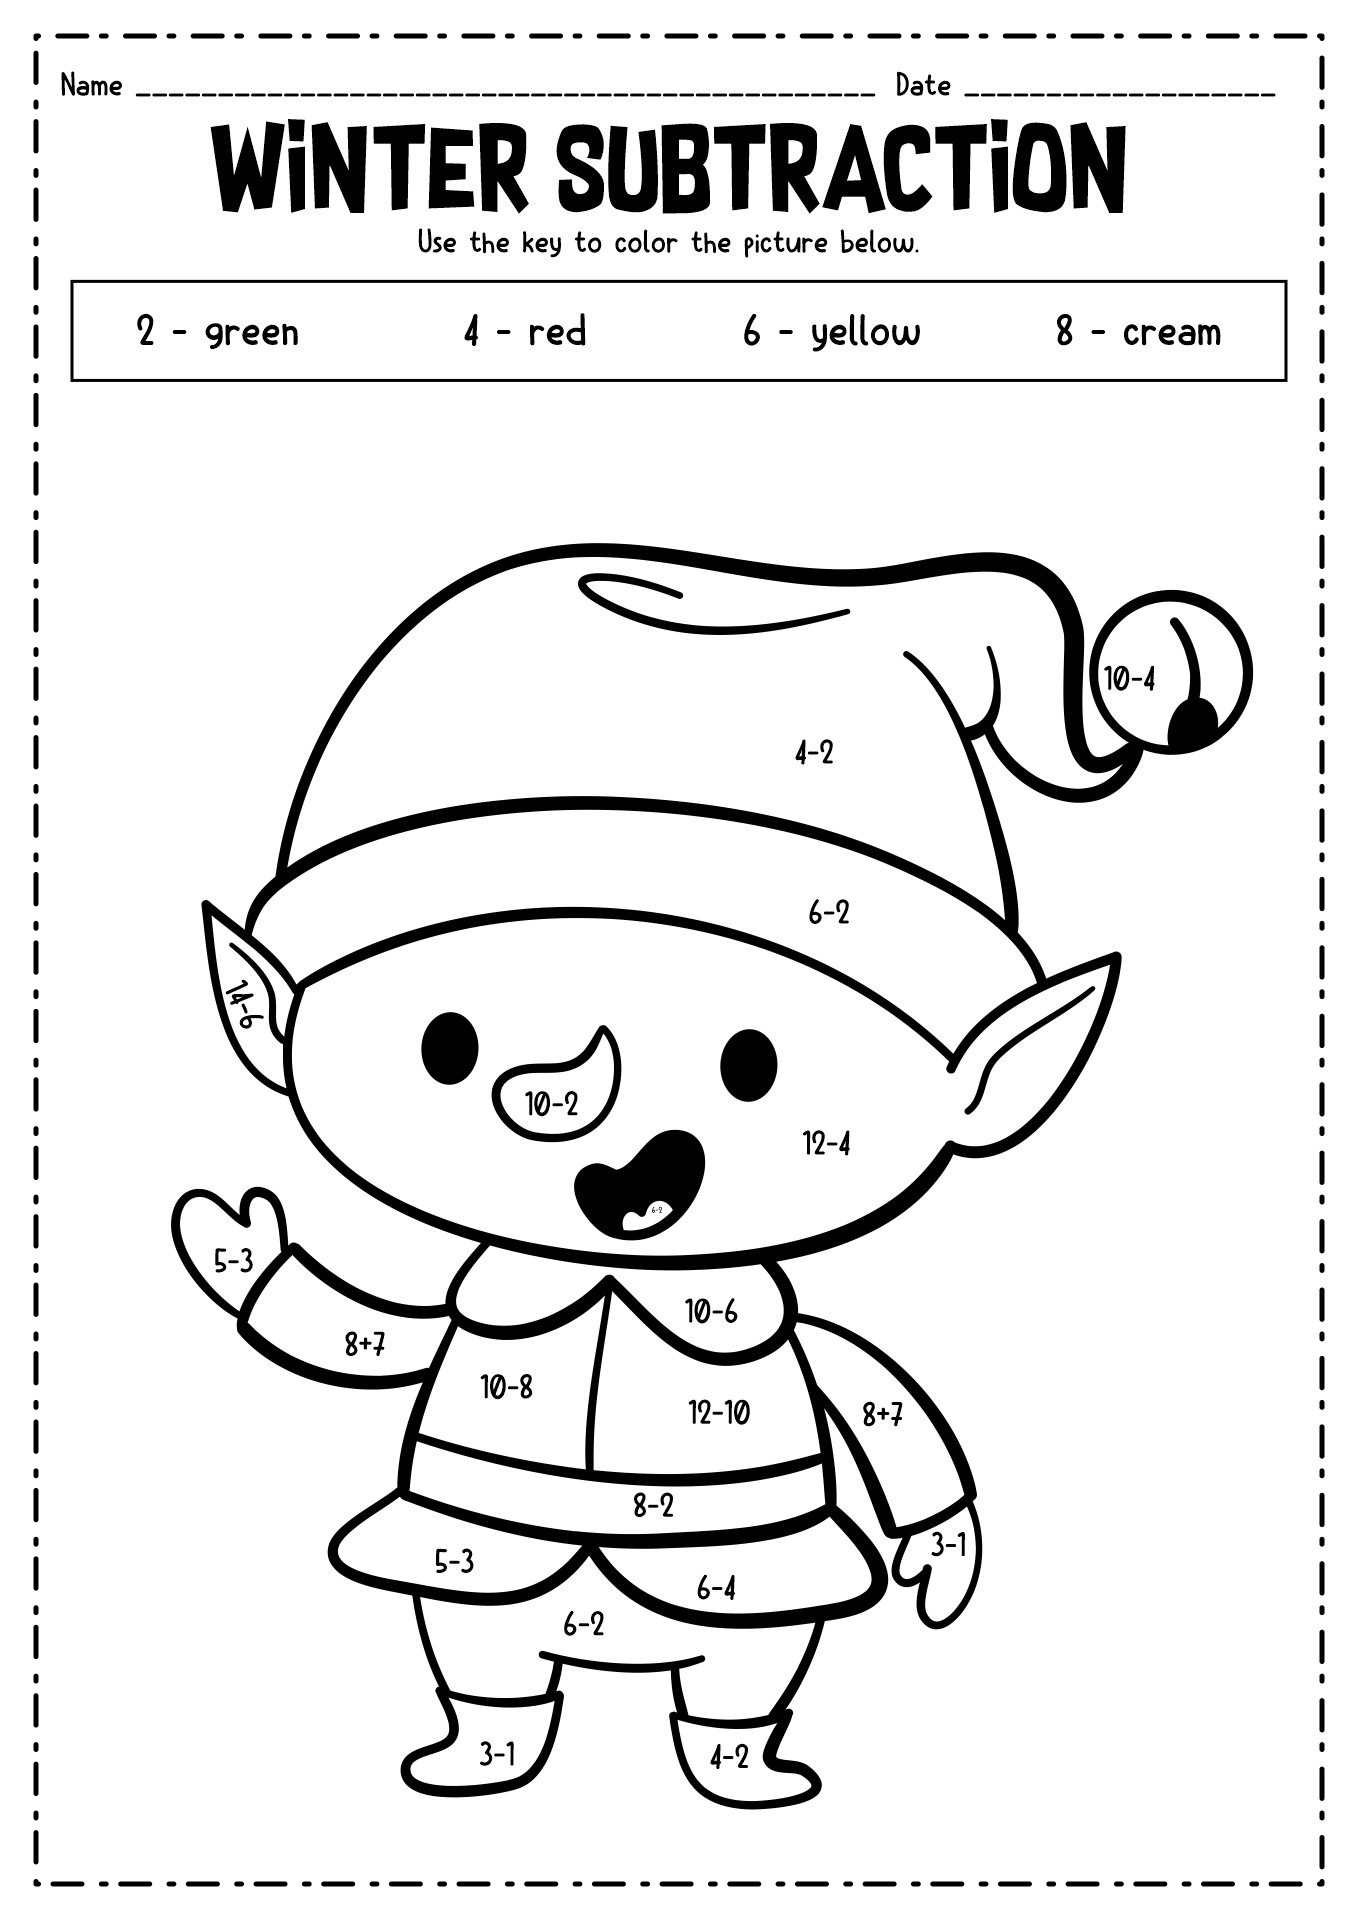 19 Best Images of Color Code Math Worksheets - Color by ...